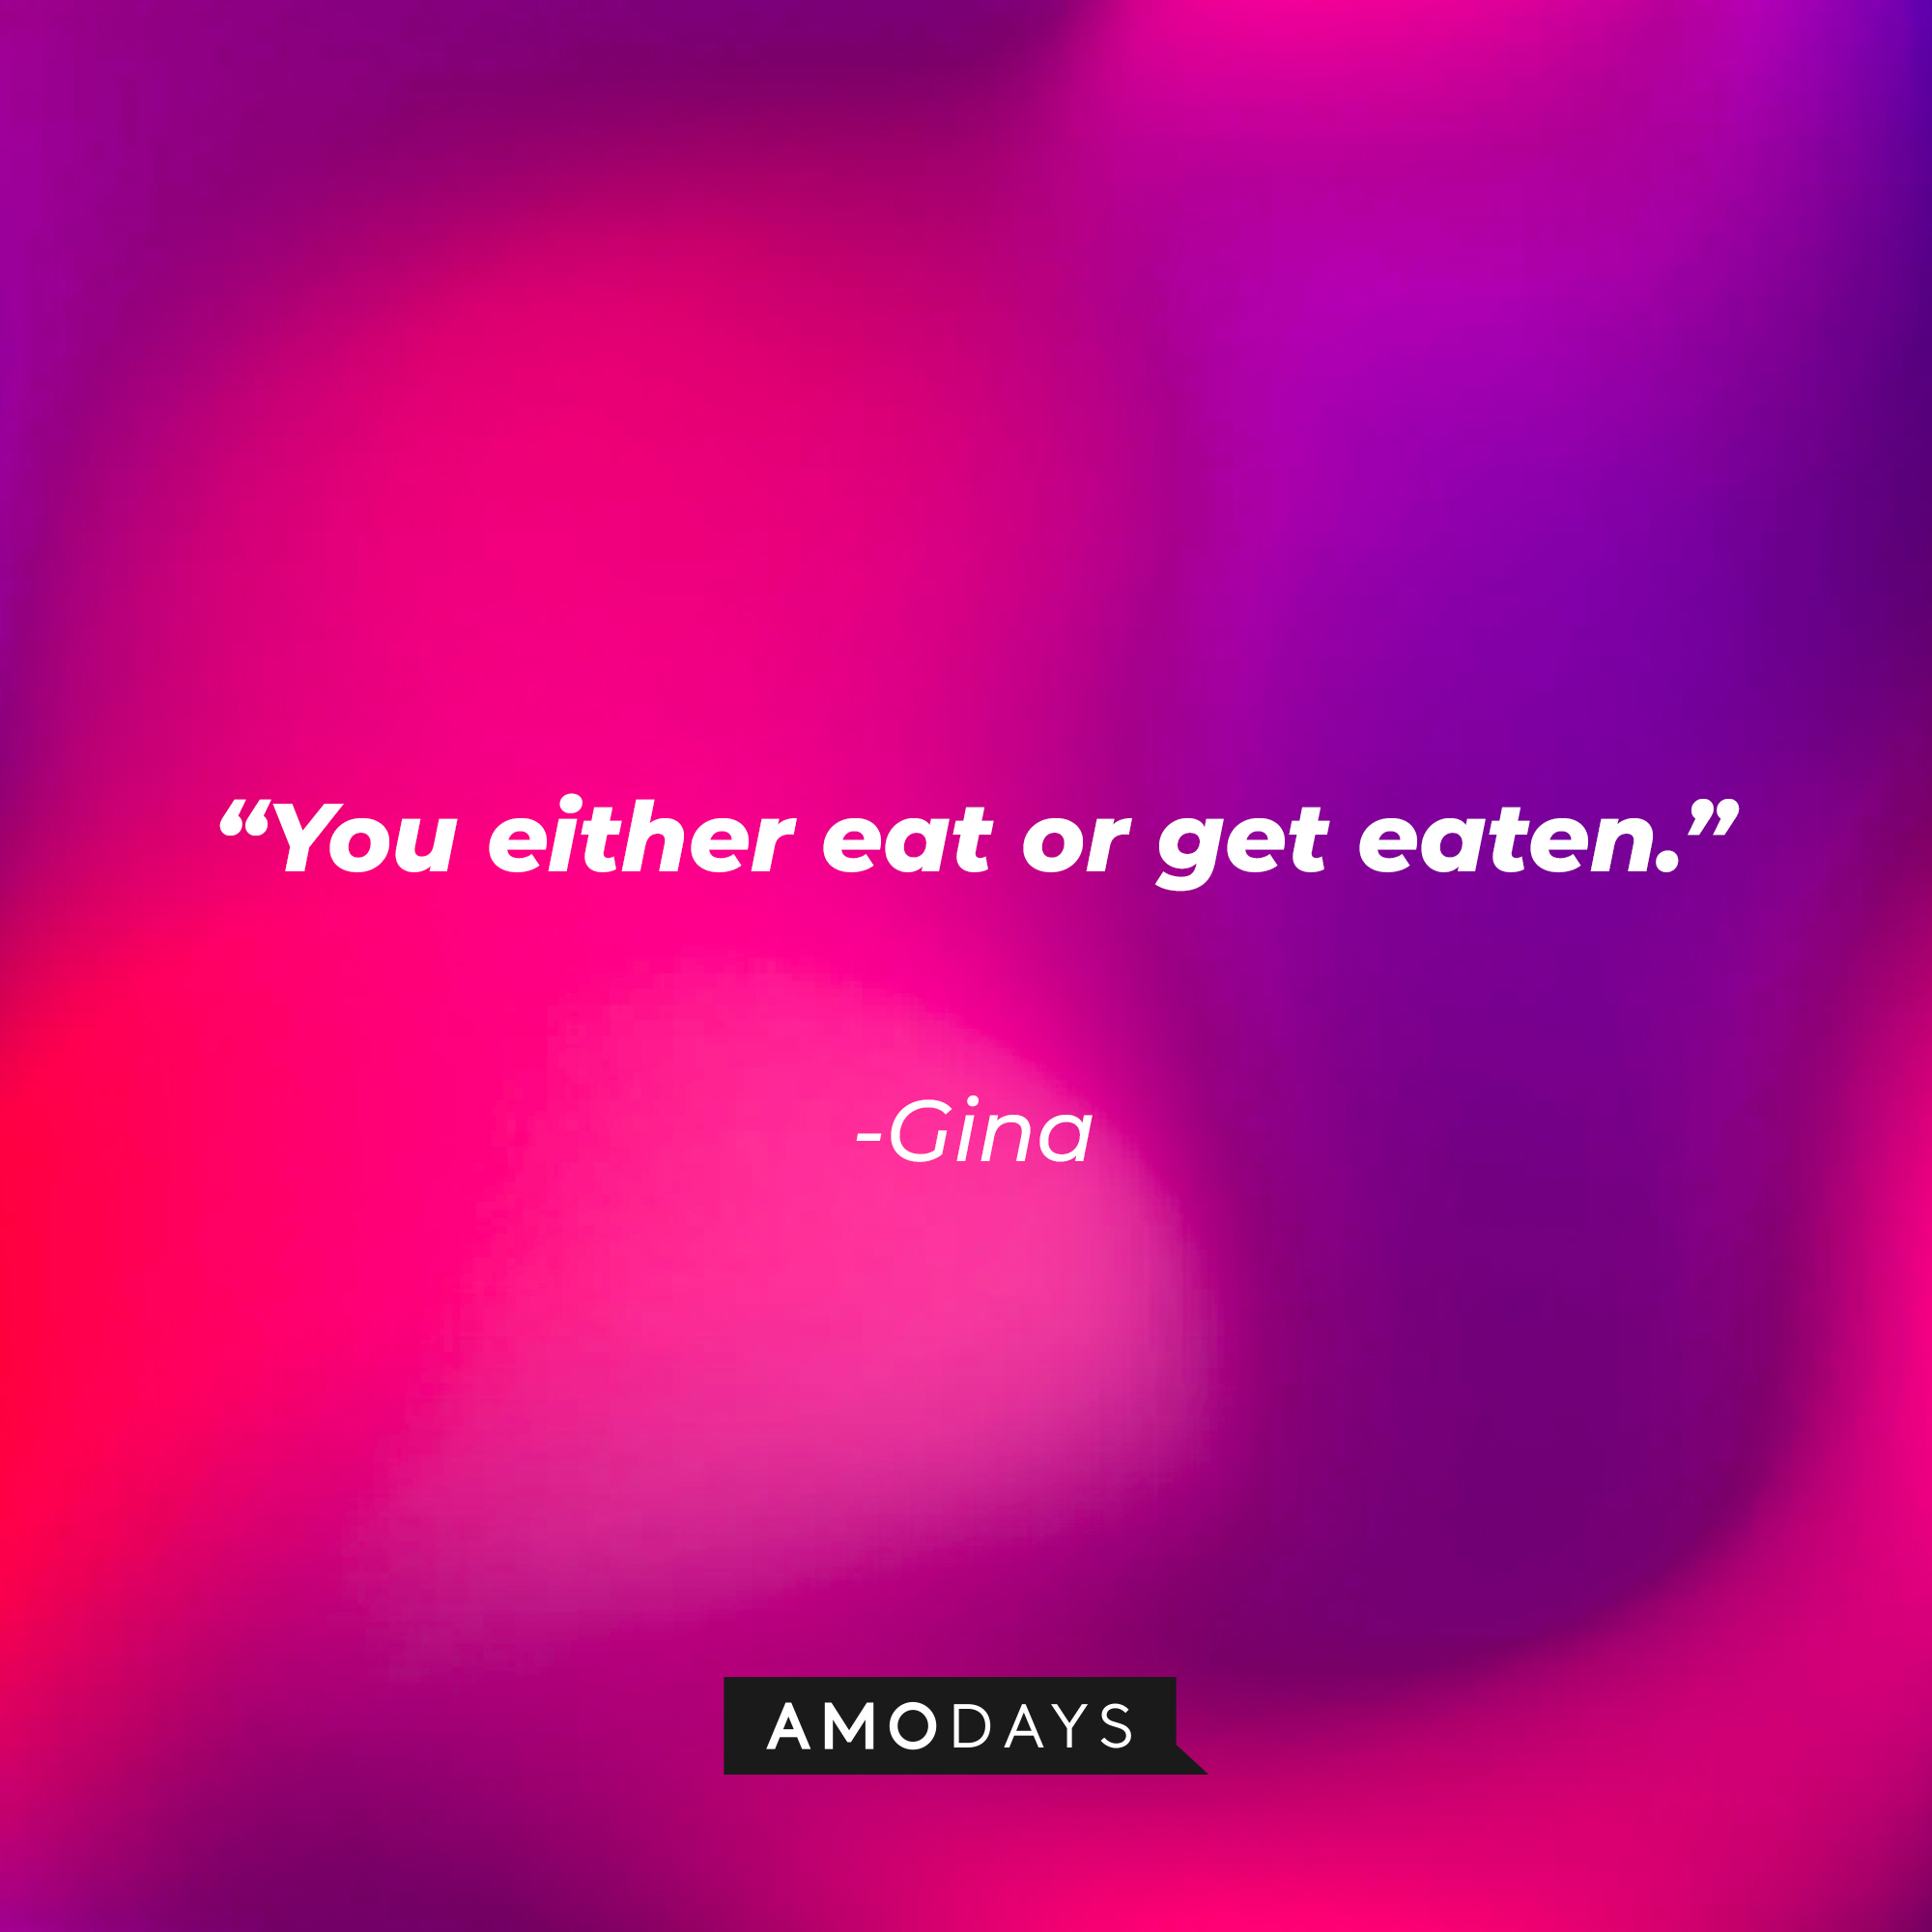 Gina’s quote: “You either eat or get eaten." | Source: AmoDays